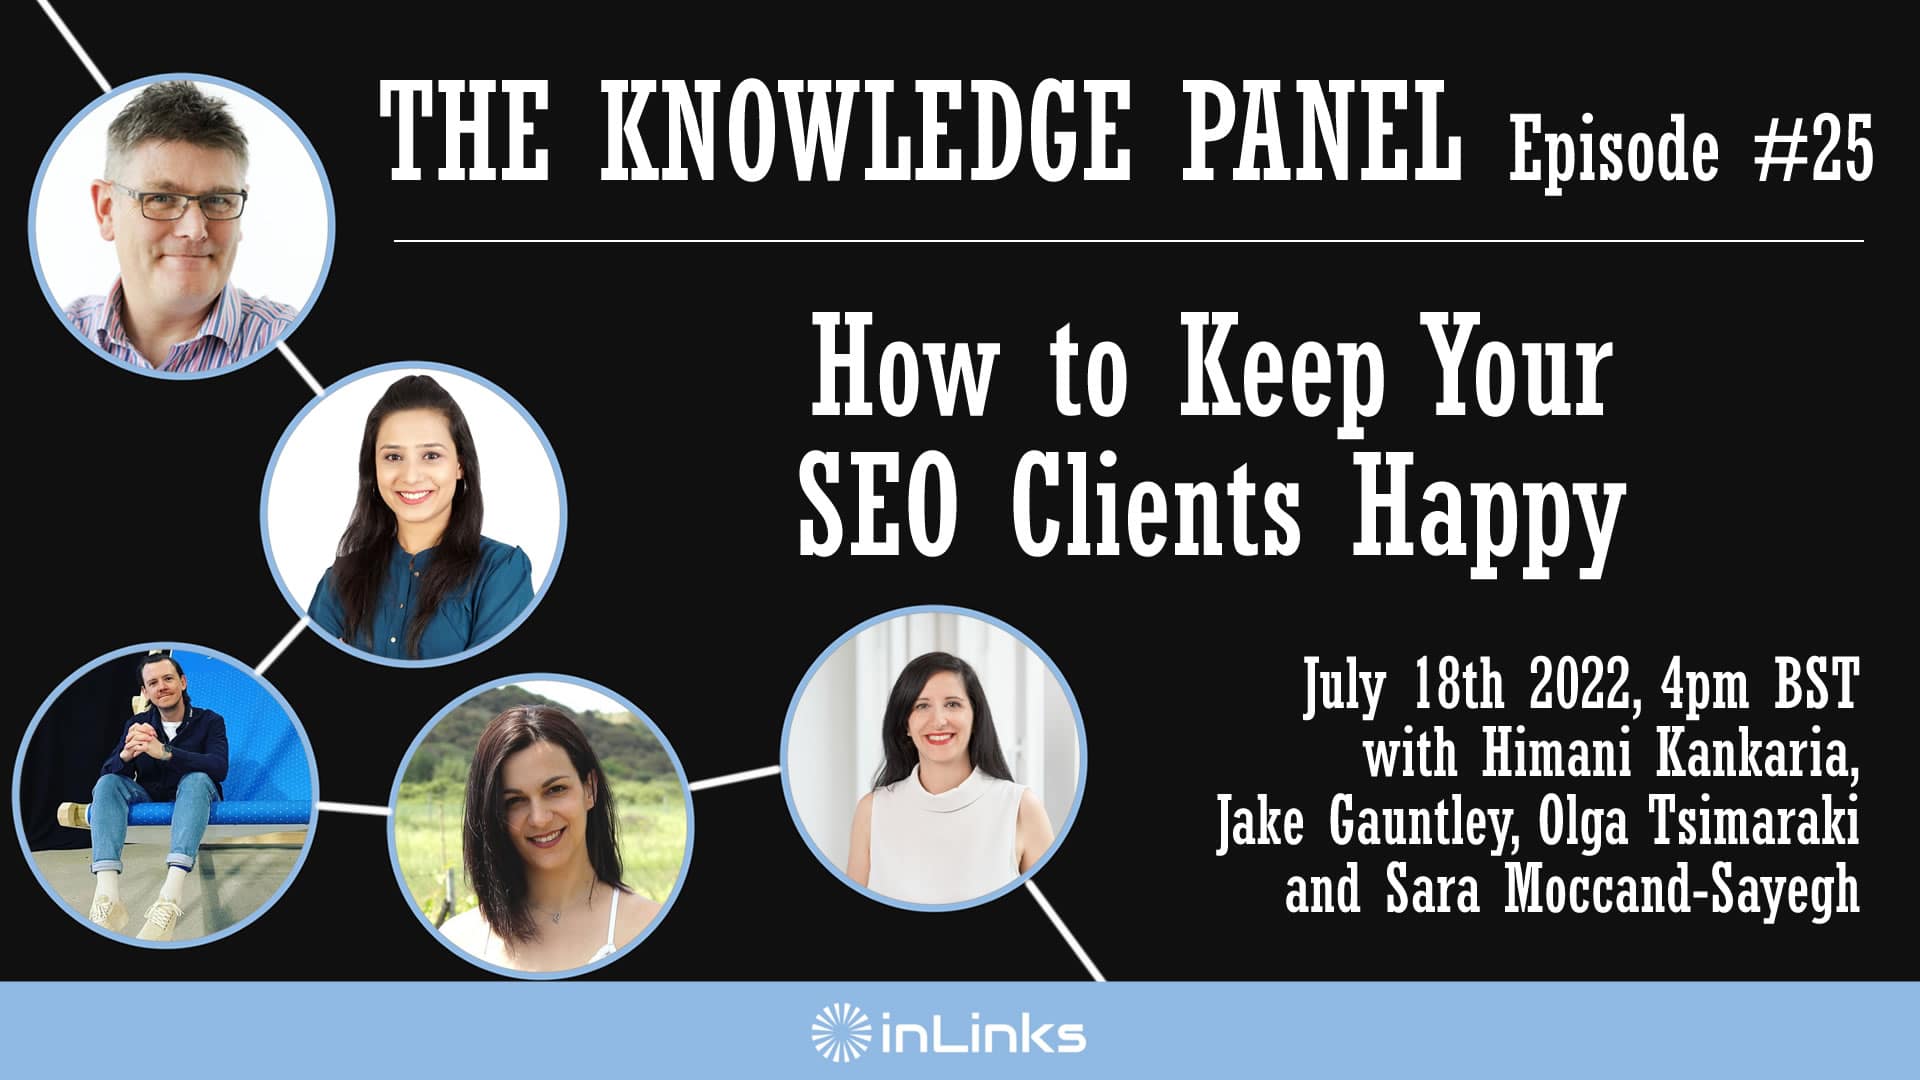 How to Keep Your SEO Clients Happy